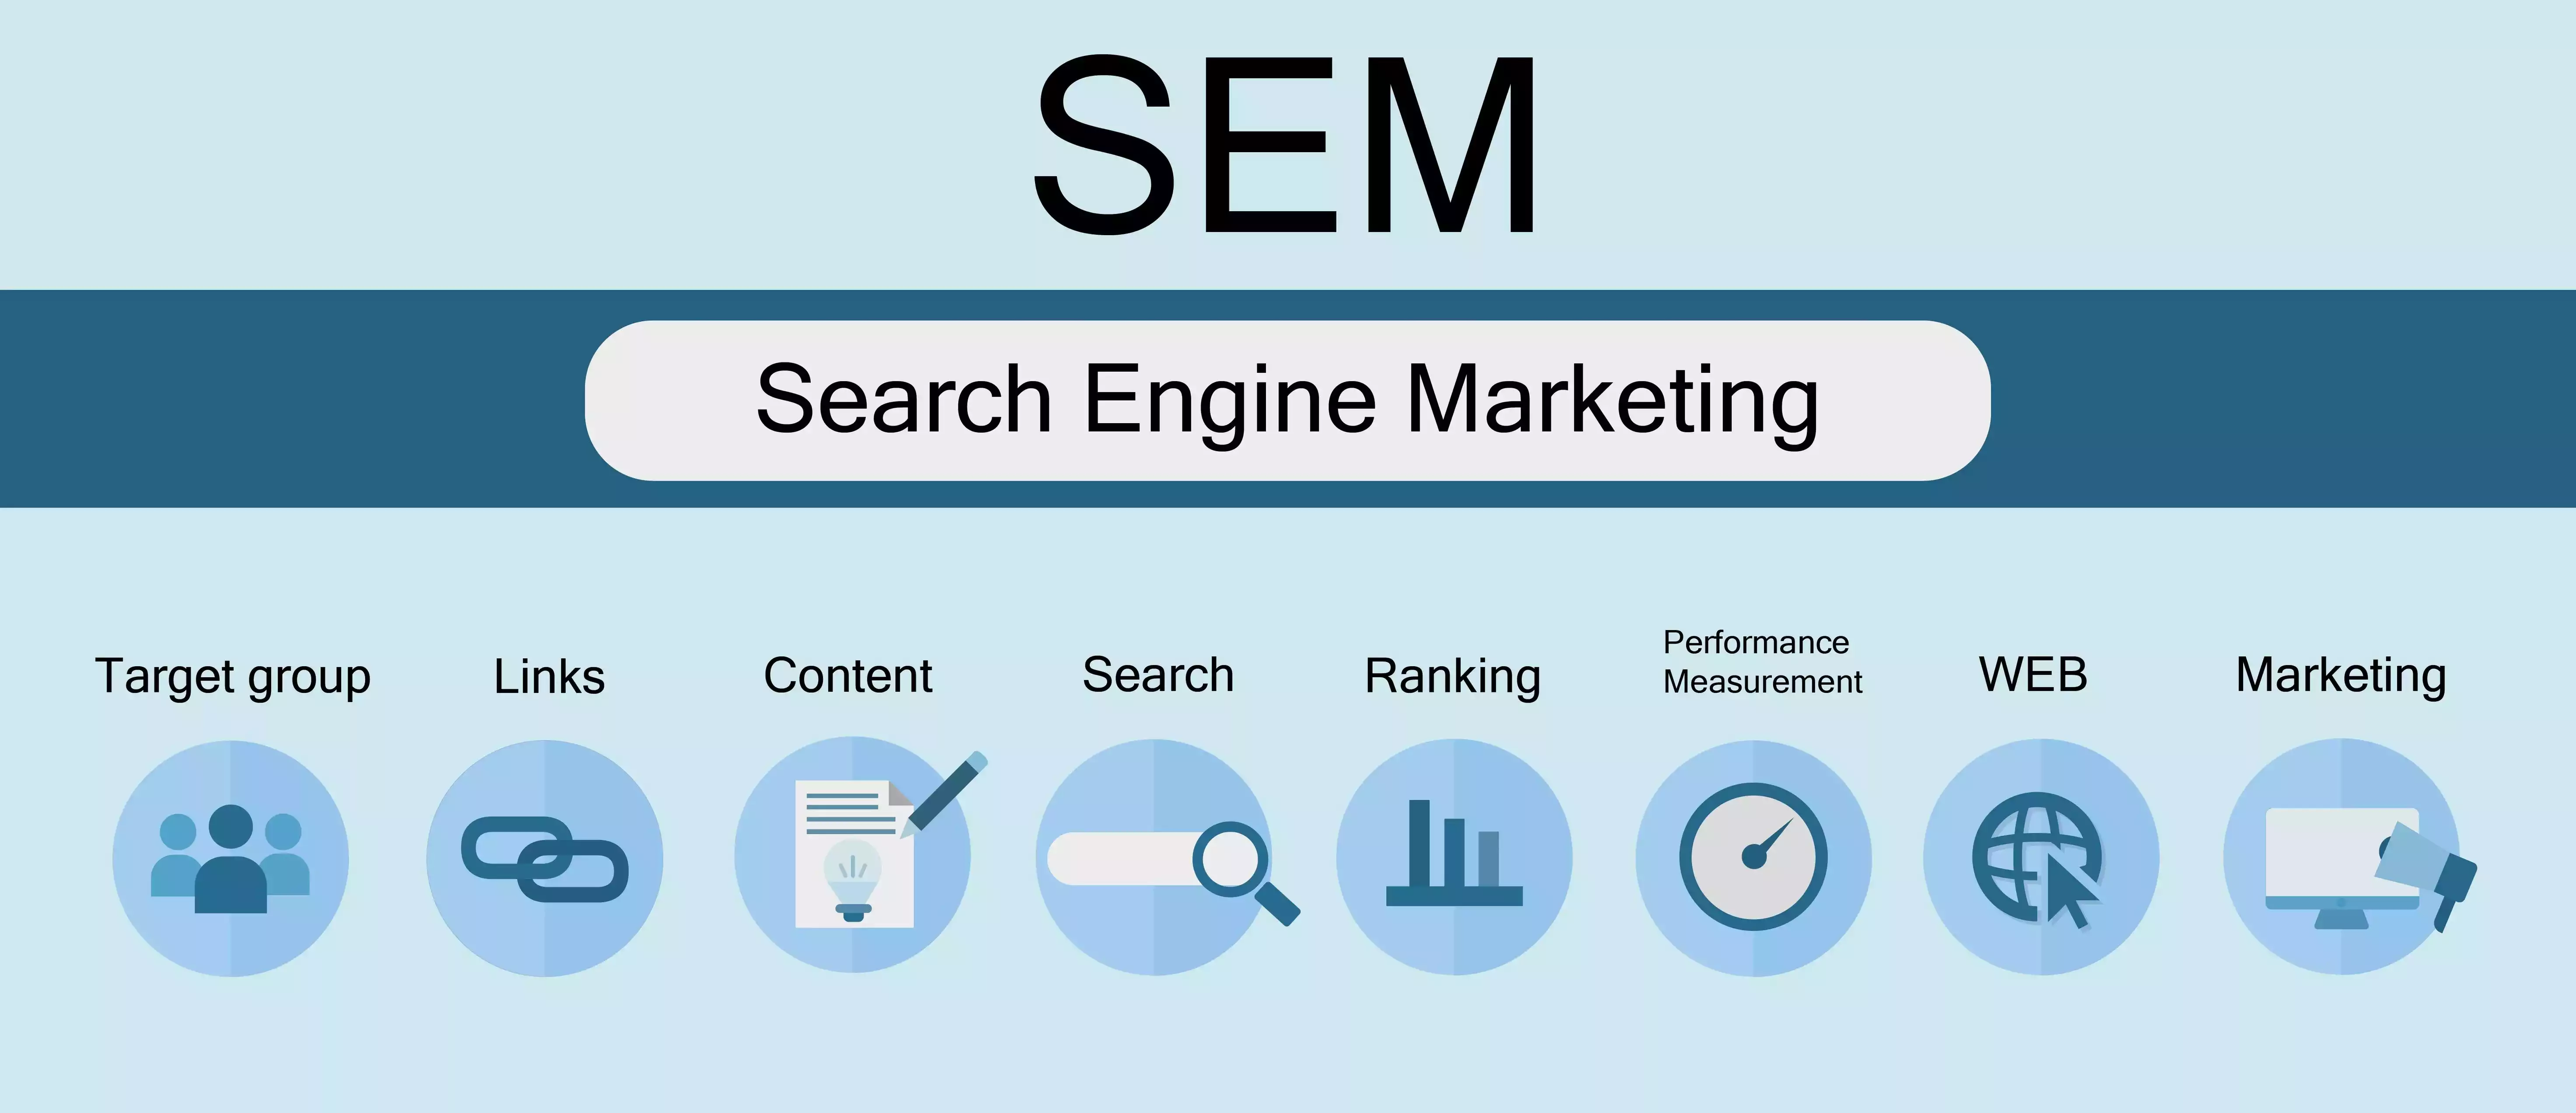 Search Engine Marketing SEM Services & Solutions